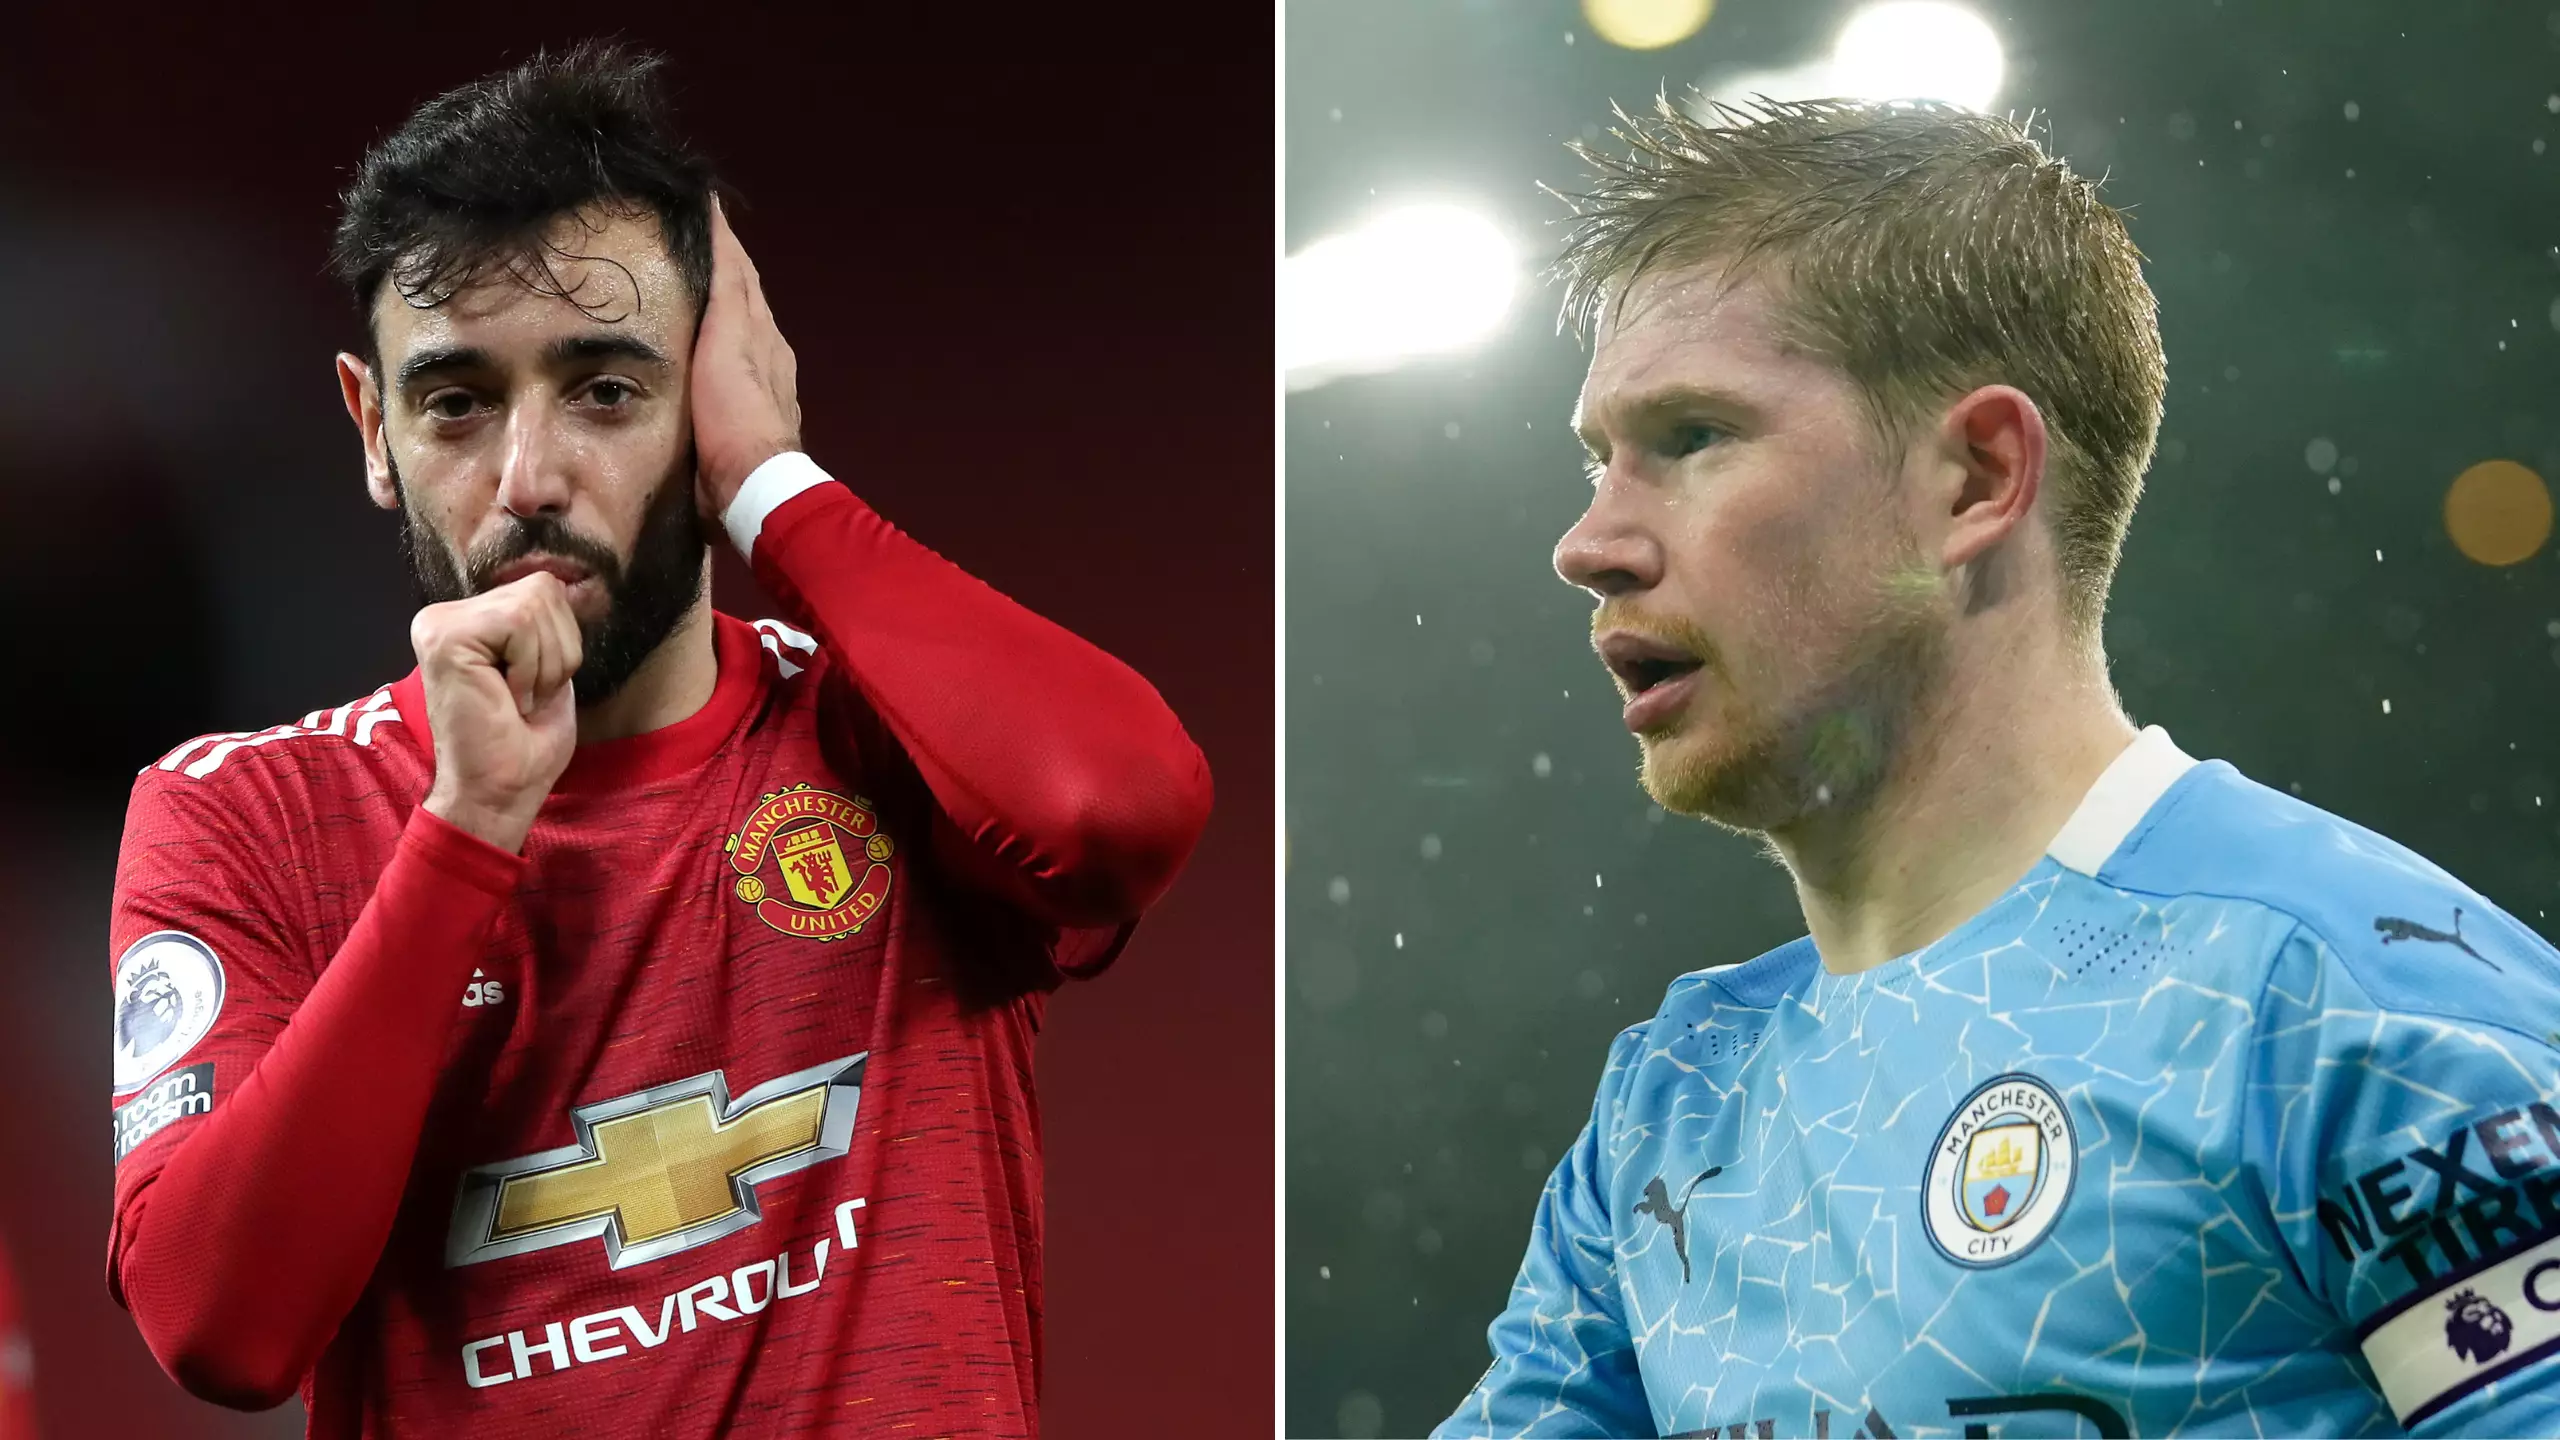 Bruno Fernandes Has "Overtaken Kevin De Bruyne To Become The Premier League's Best Player"